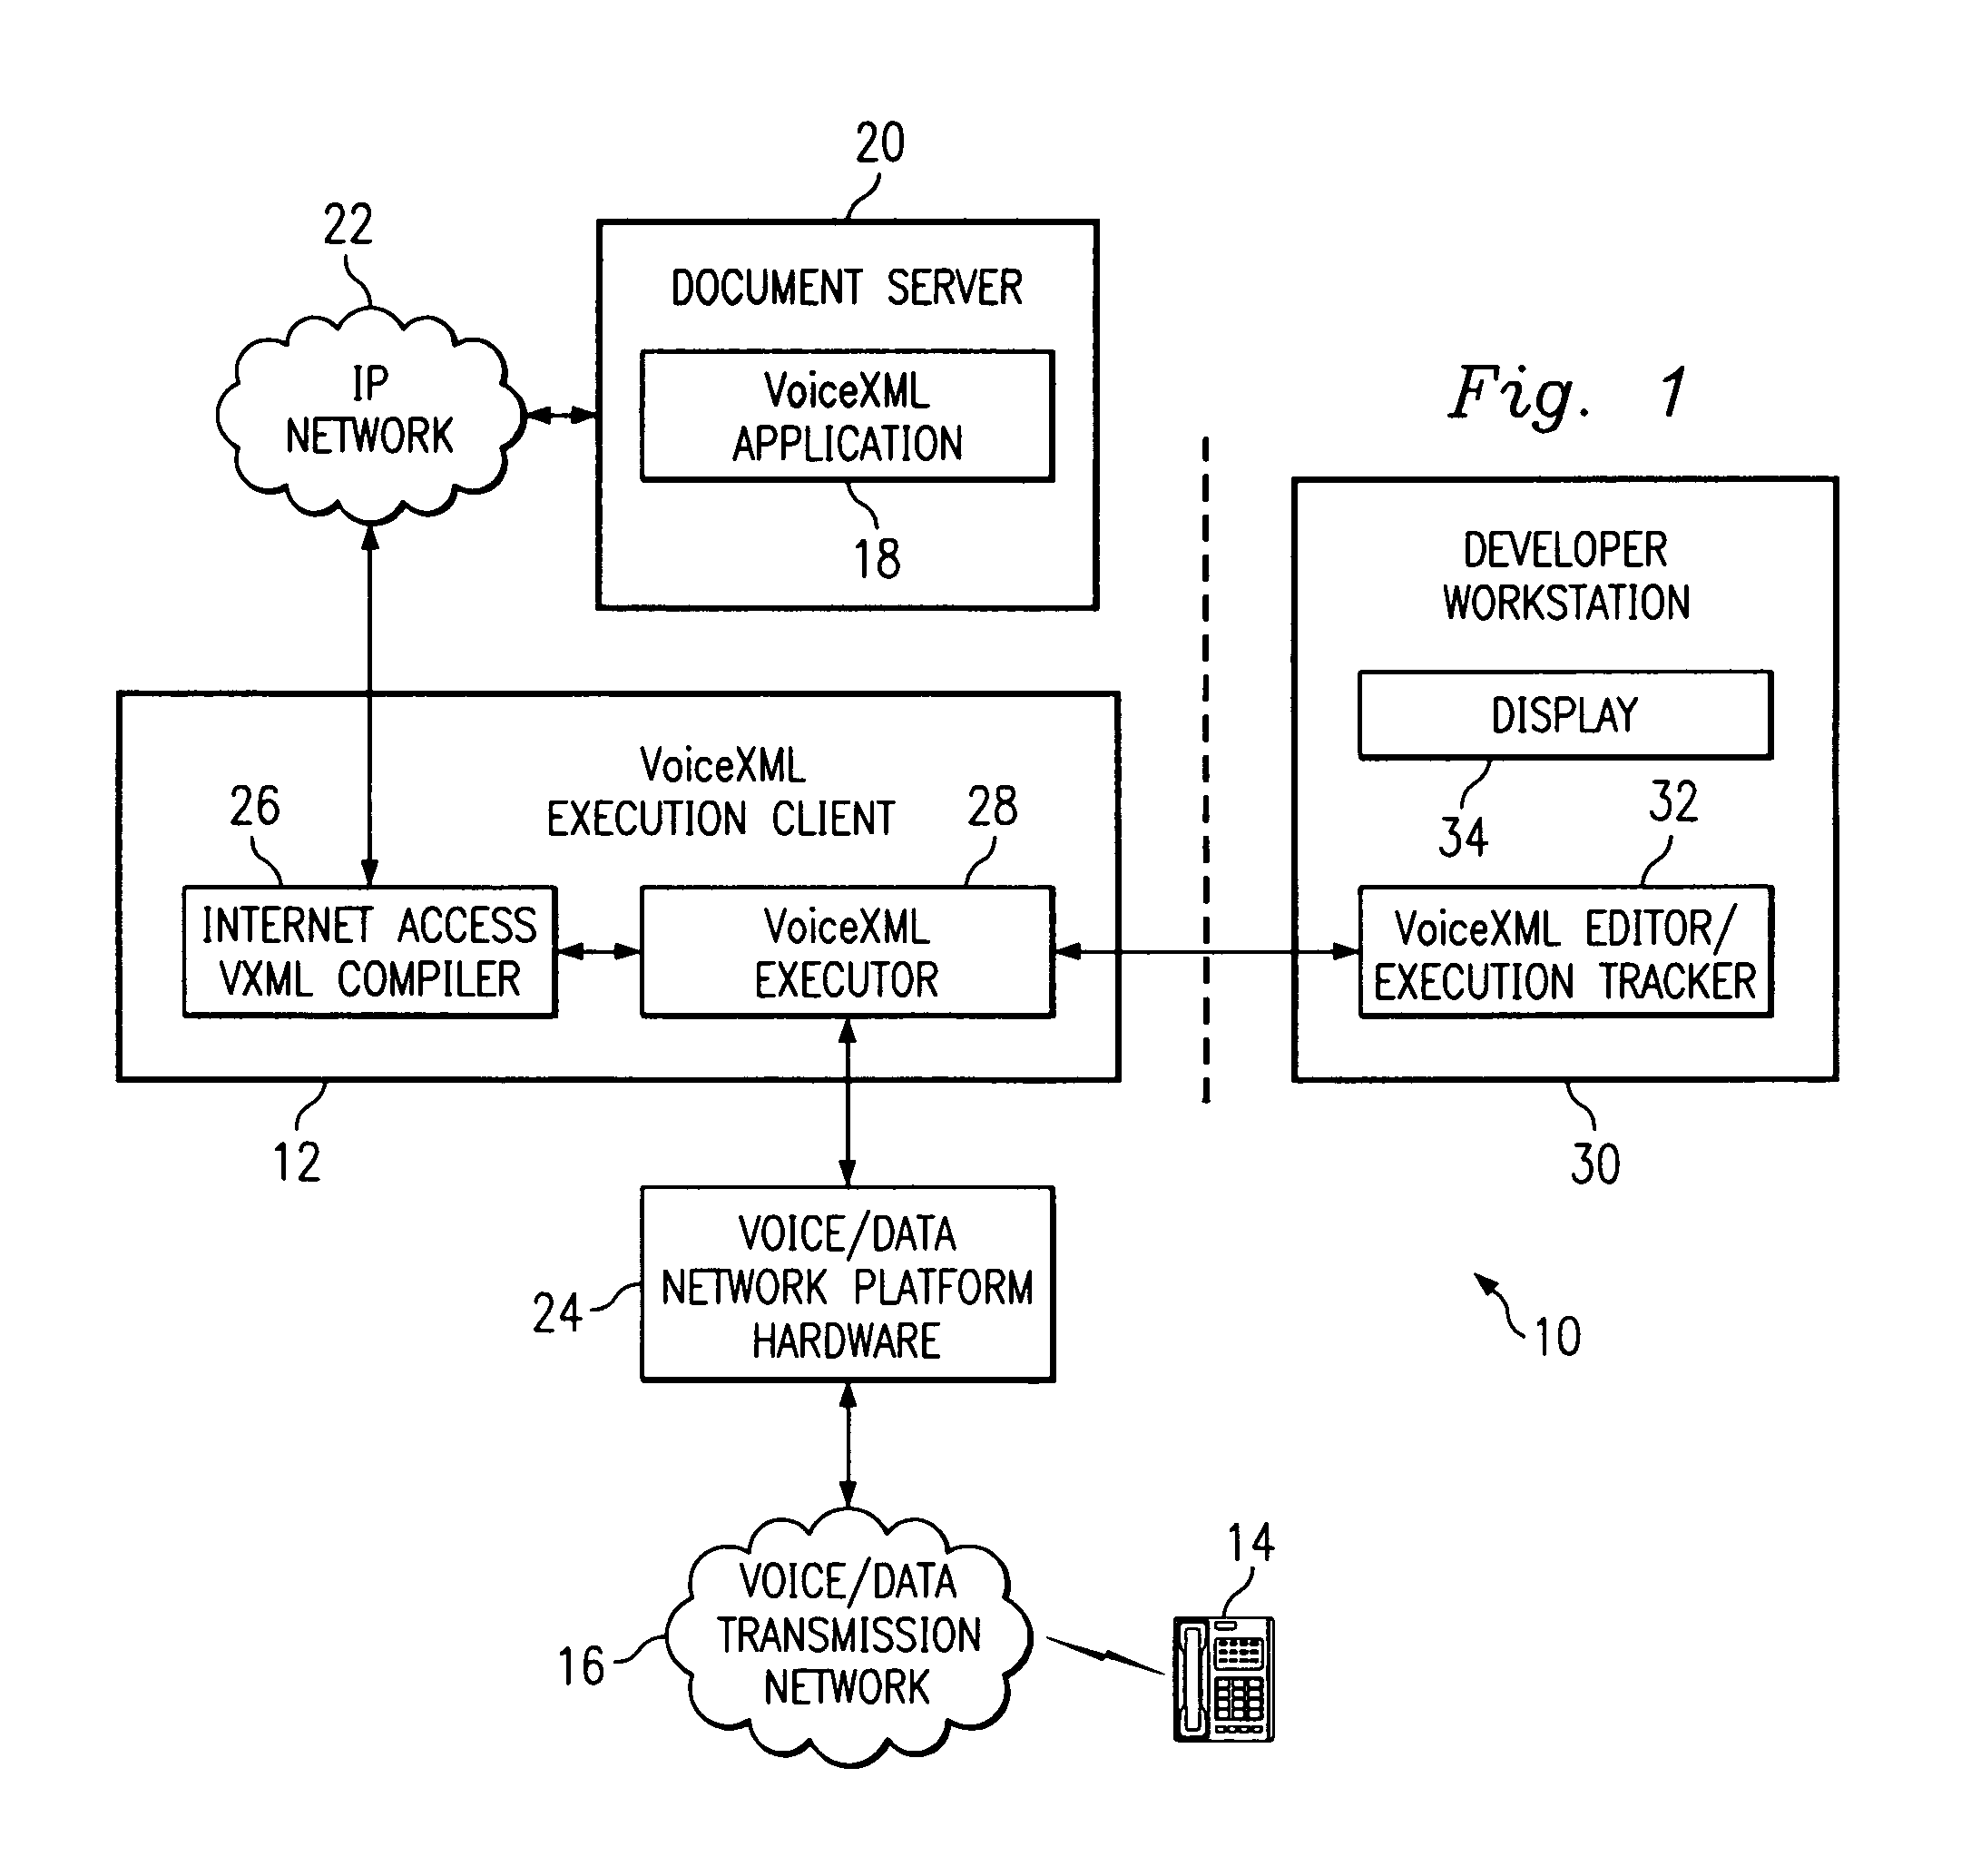 System and method for tracking VoiceXML document execution in real-time